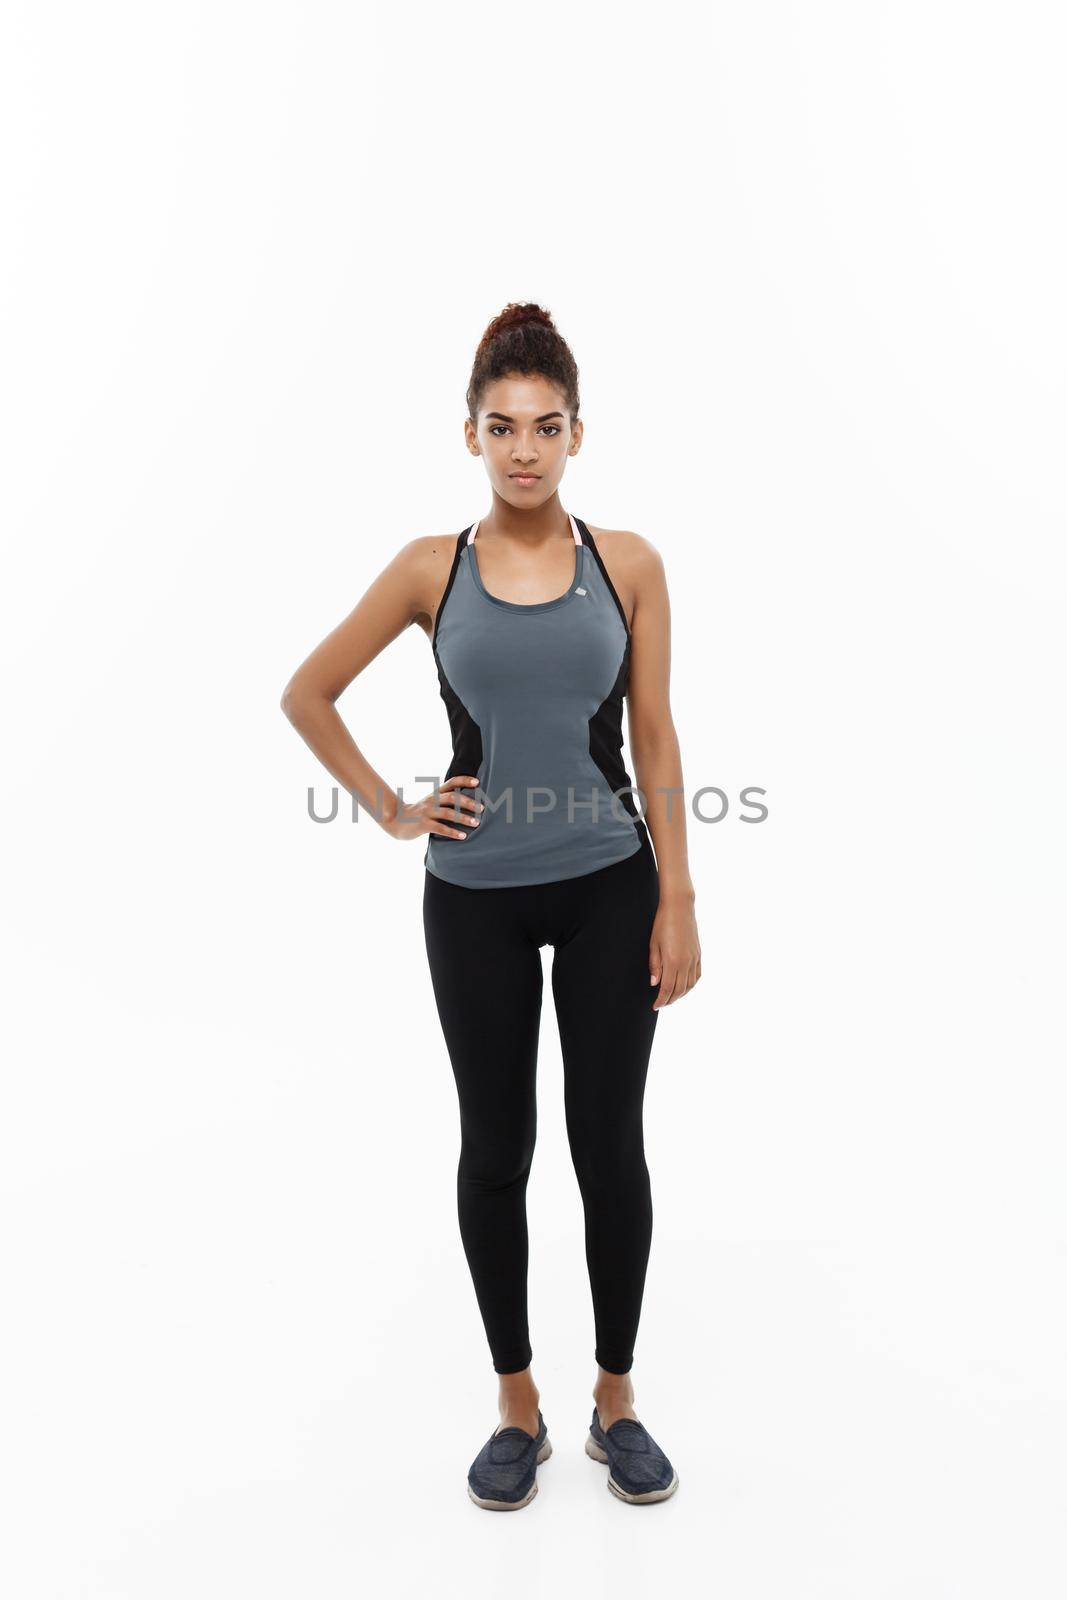 Healthy and Fitness concept - portrait of African American girl posing with fitness clothes over white studio